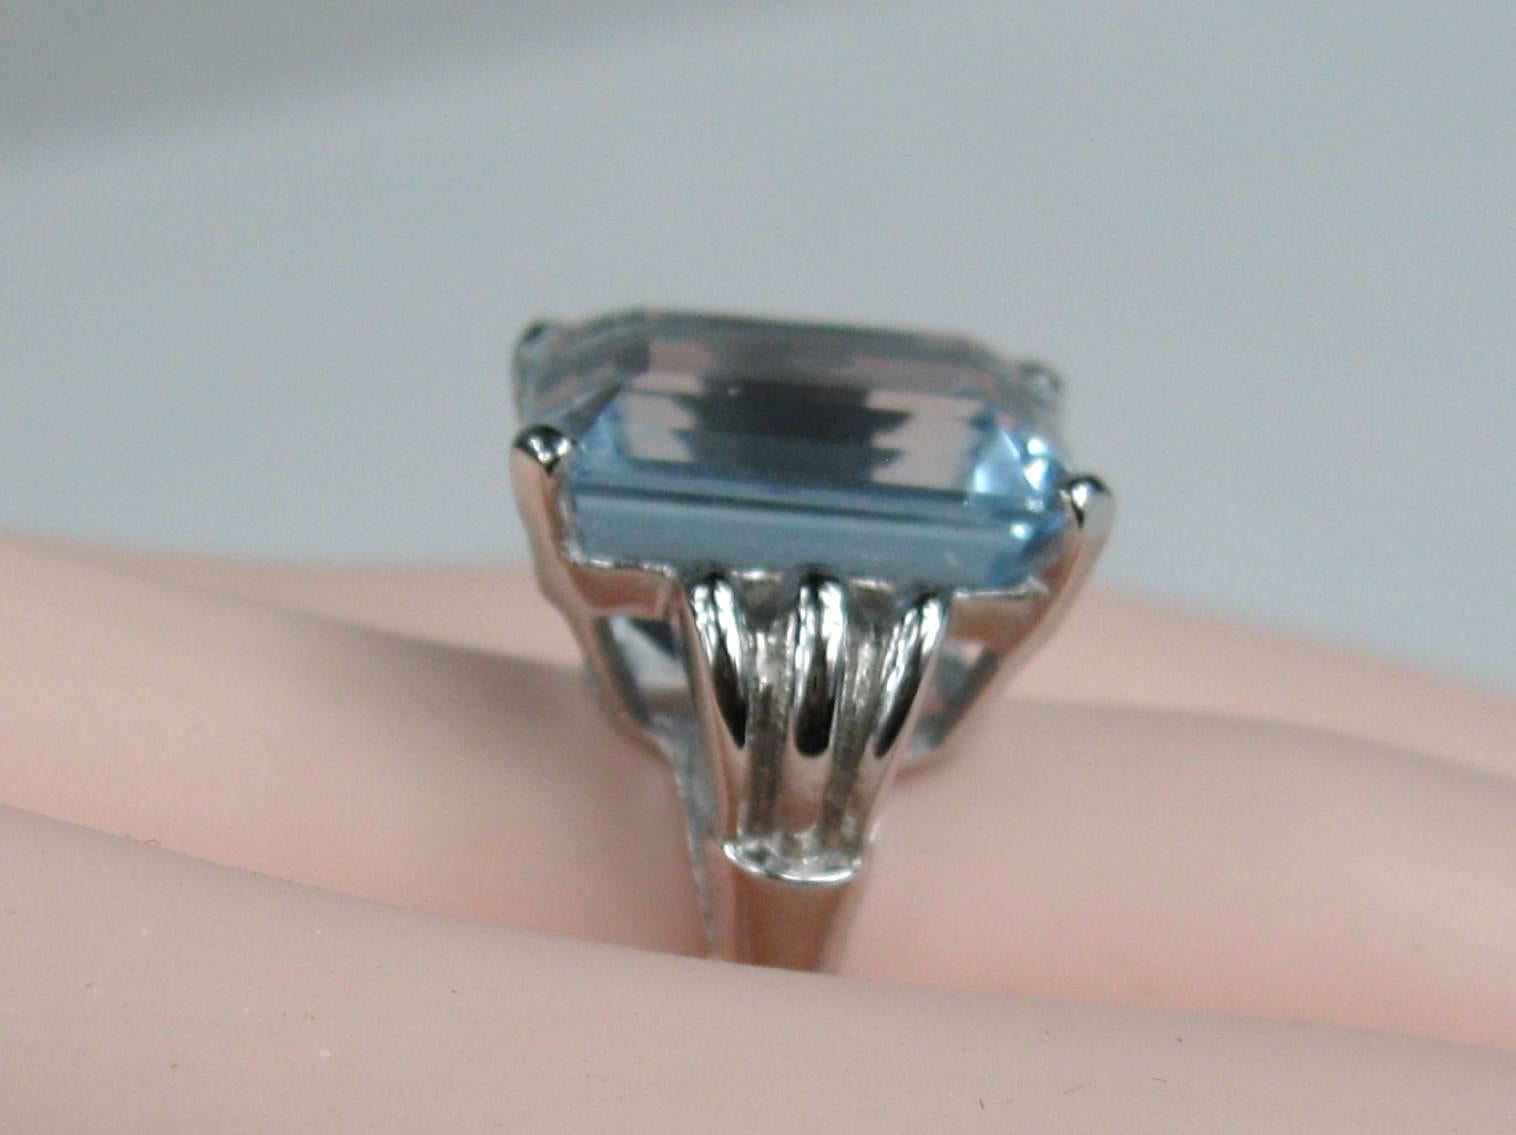 Simply stunning on this 14K White Gold Emerald Cut Aquamarine Engagement Ring. Large 13.75 Carat Octagonal cut aquamarine set in 14K white gold. Step Cut. Color Greenish Blue. Stone measures 14.85 x 14.06 x 9.37 Per GIA report. The ring is a size